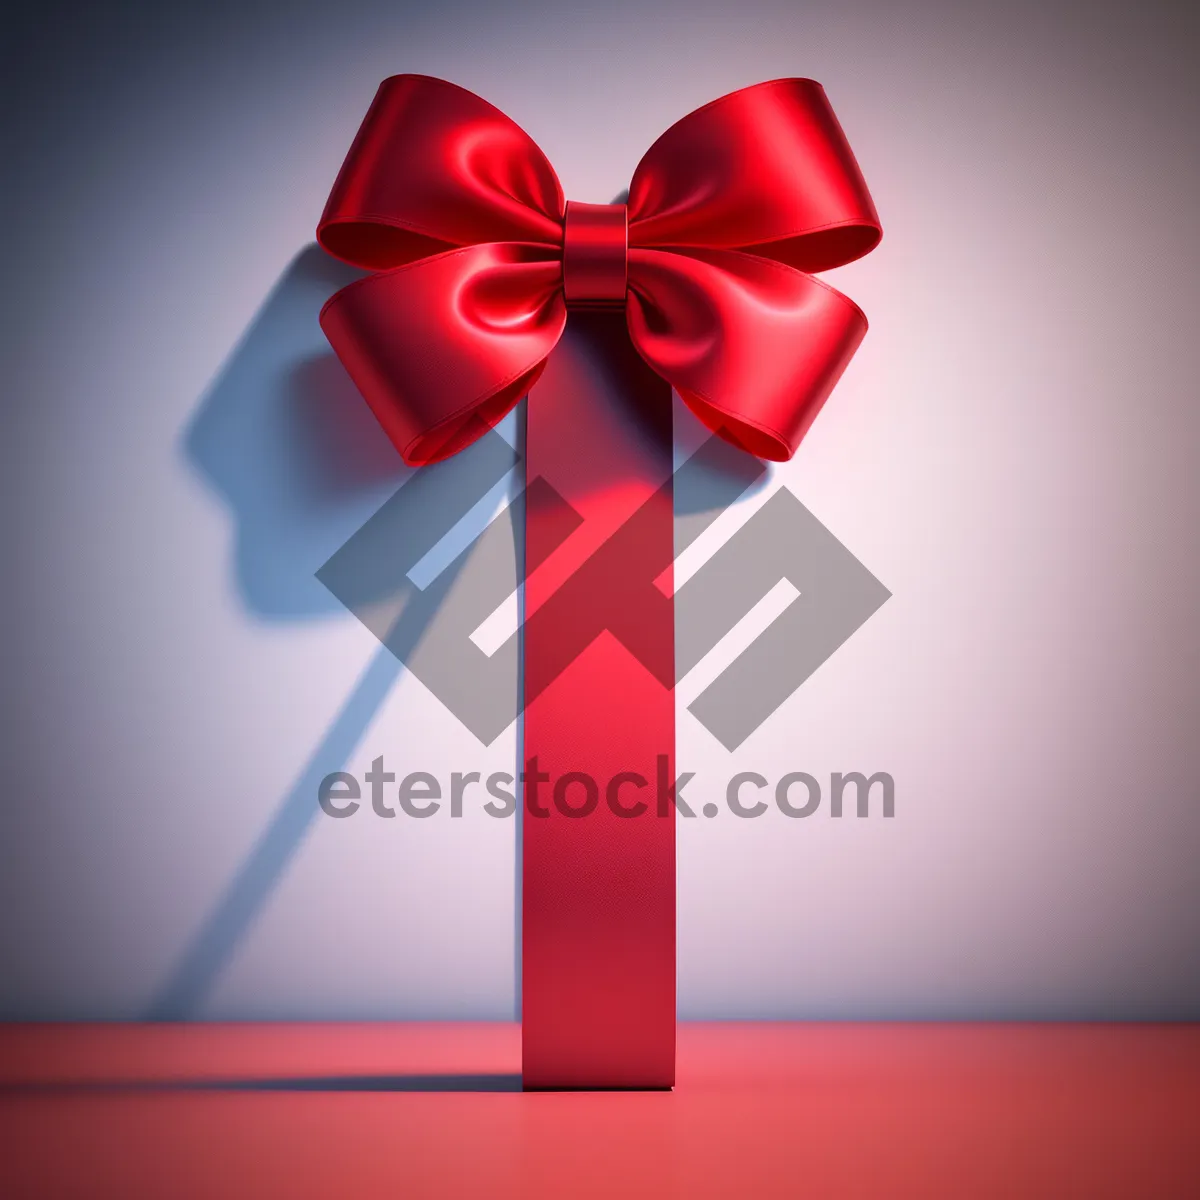 Picture of Silk Ribbon Gift Bow - Celebrate in Style!